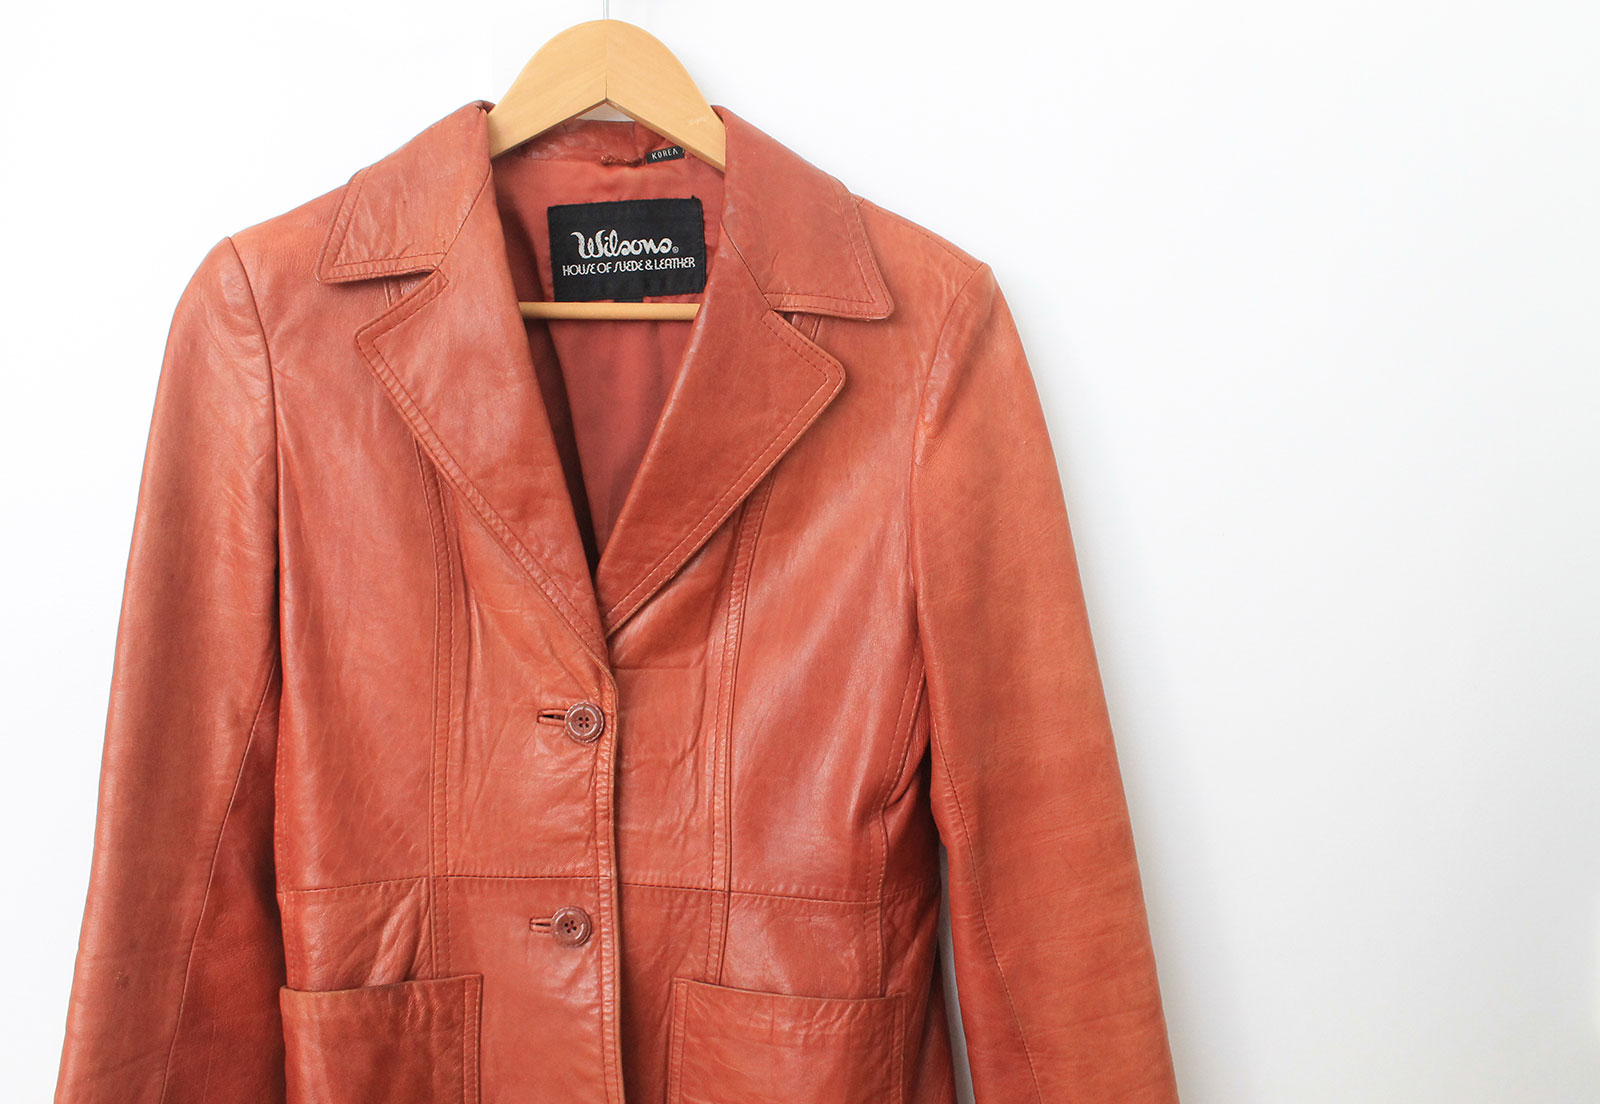 How to Clean a Leather Jacket